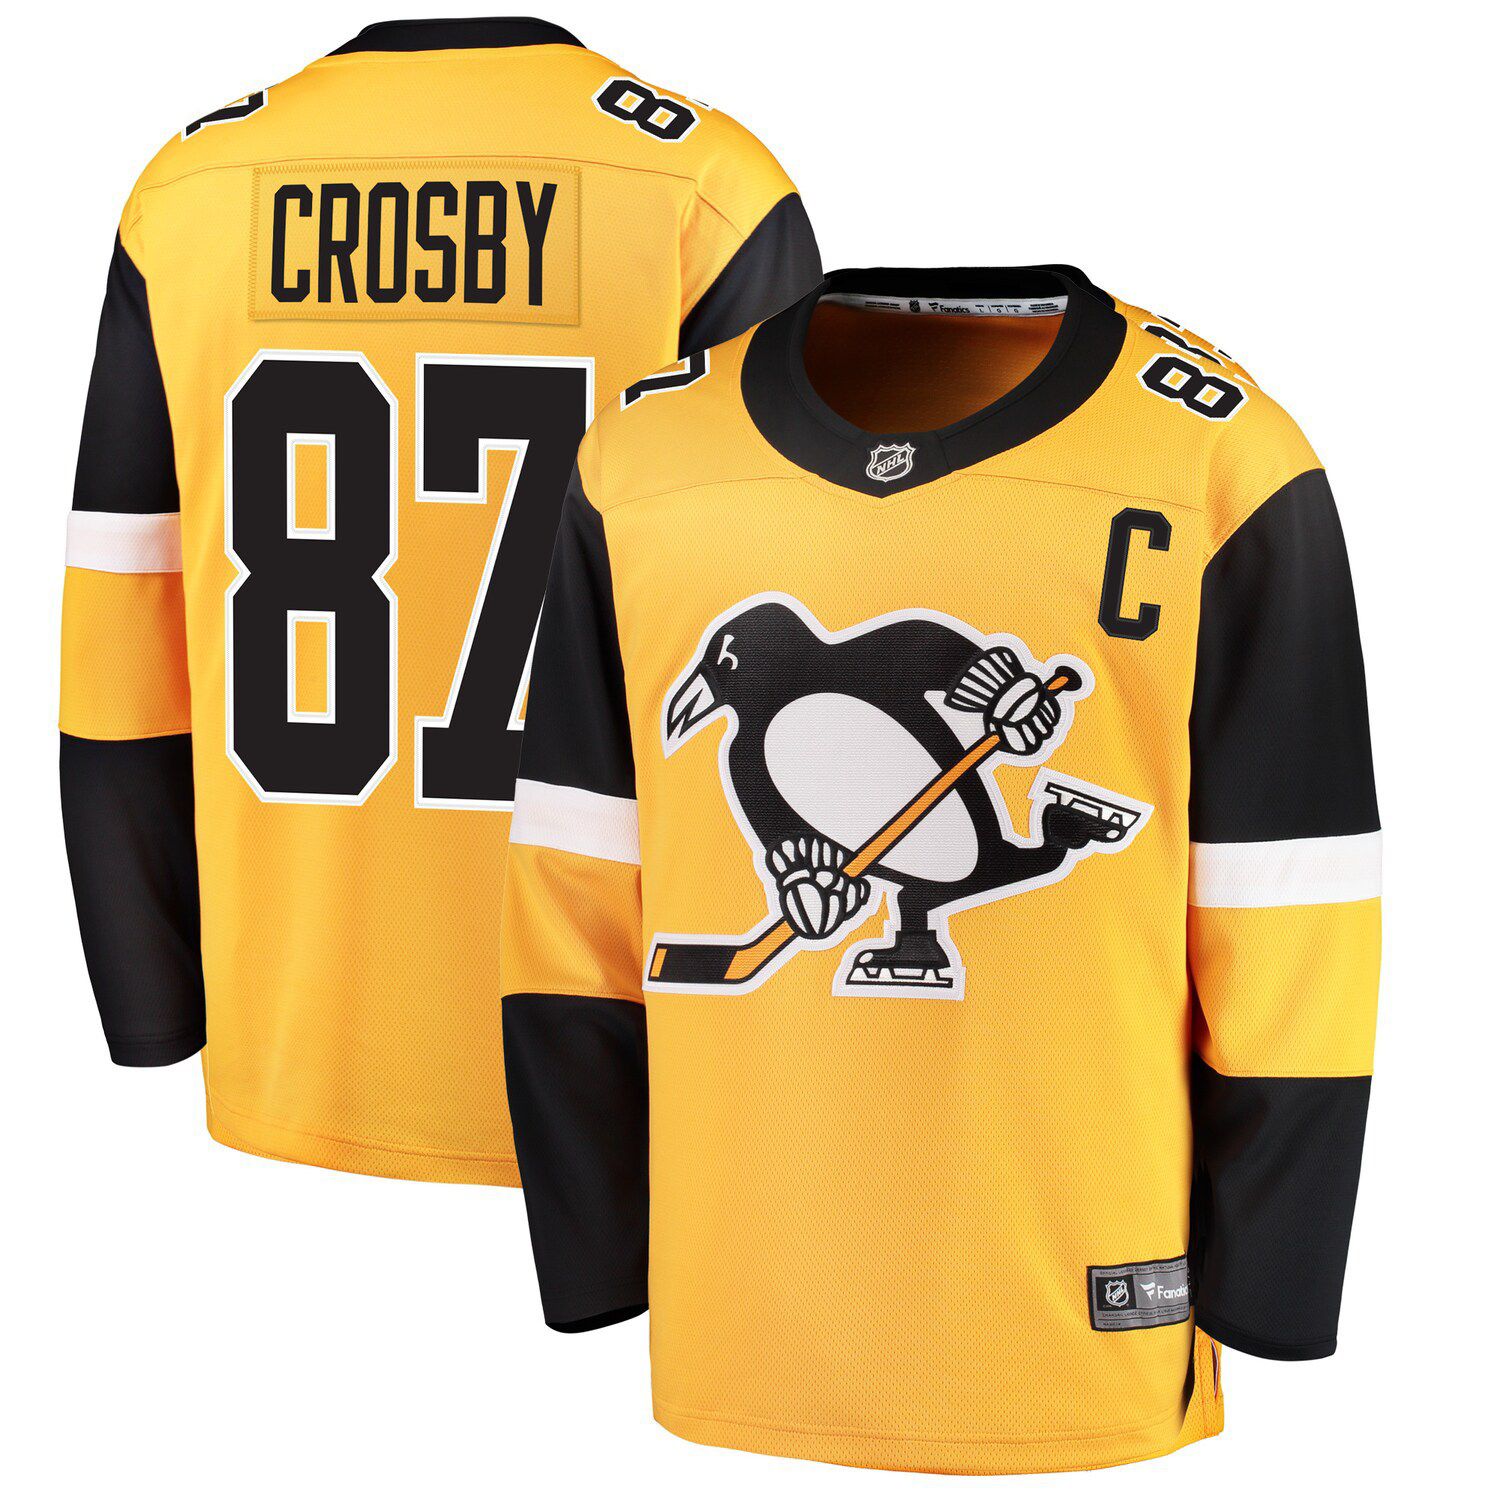 Pittsburgh Penguins Fanatics Branded Iconic Name & Number Graphic T-Shirt -  Sidney Crosby 87 - Womens